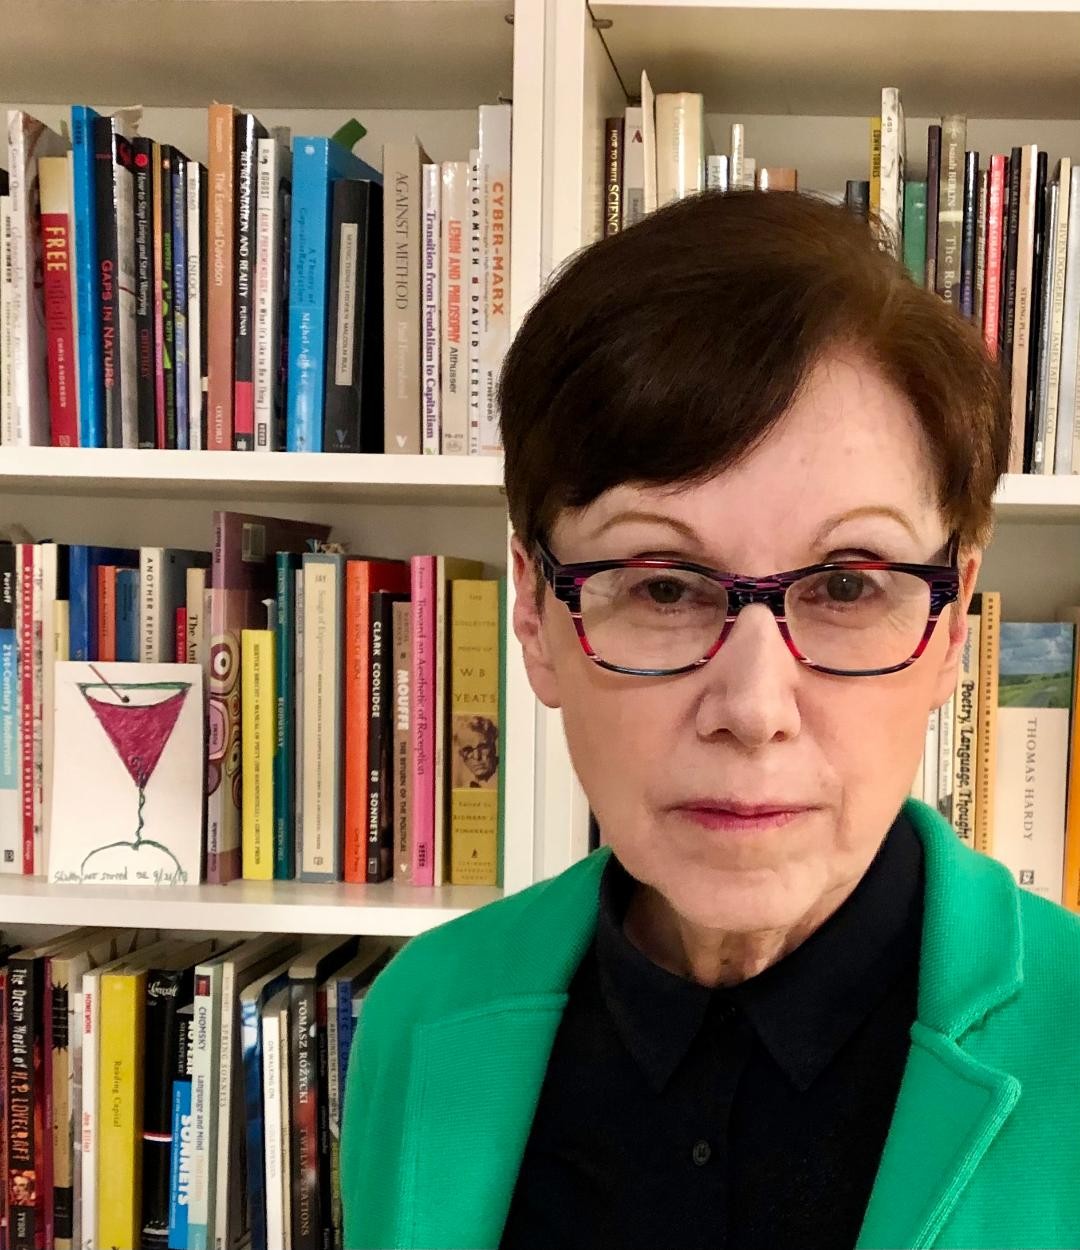 Elaine Equi stands in front of a bookshelf, wearing a black button-up and green blazer.